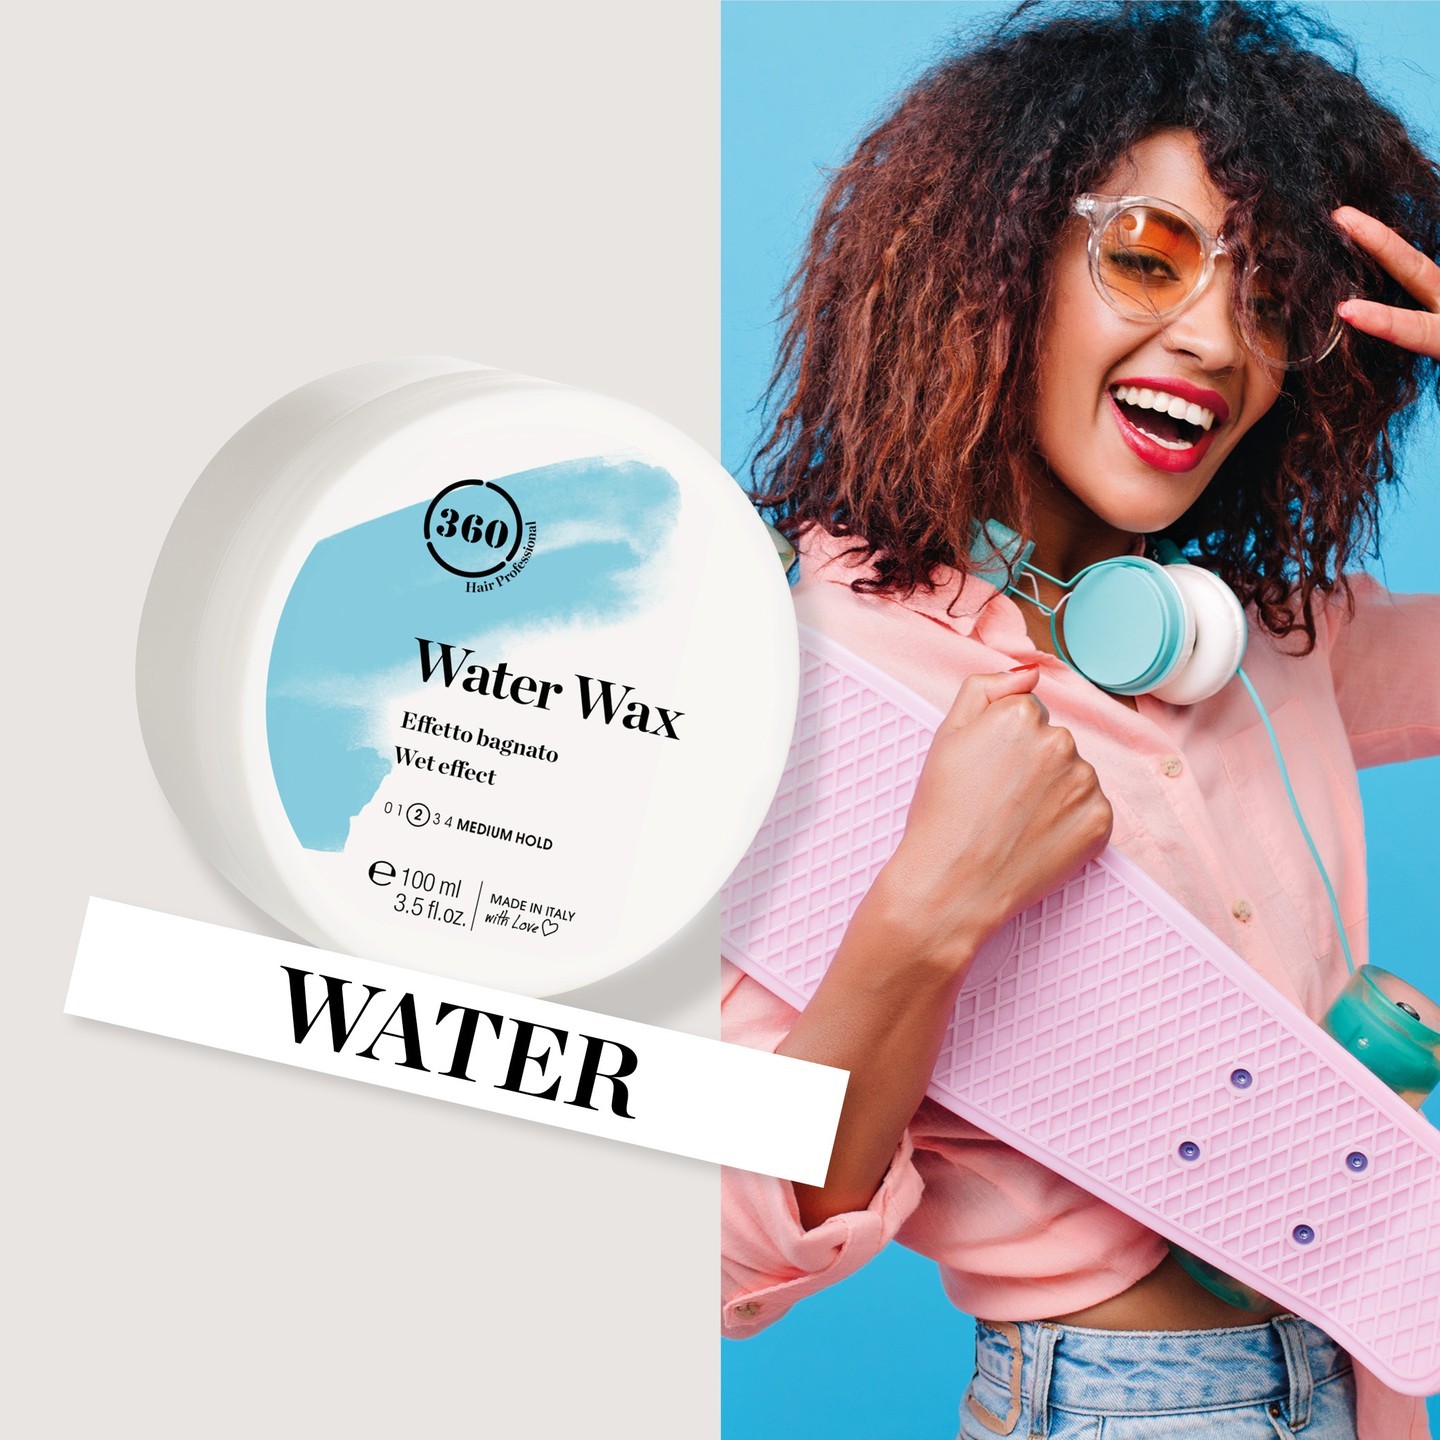 💦WATER-based wax to brighten and define your hairstyle
.
.
.
💦Definizione e luminosità con WATER, cera effetto bagnato a base d’acqua!
.
.
.
#360hair #360hairprofessional
#360hairproducts
#madeinitalywithlove